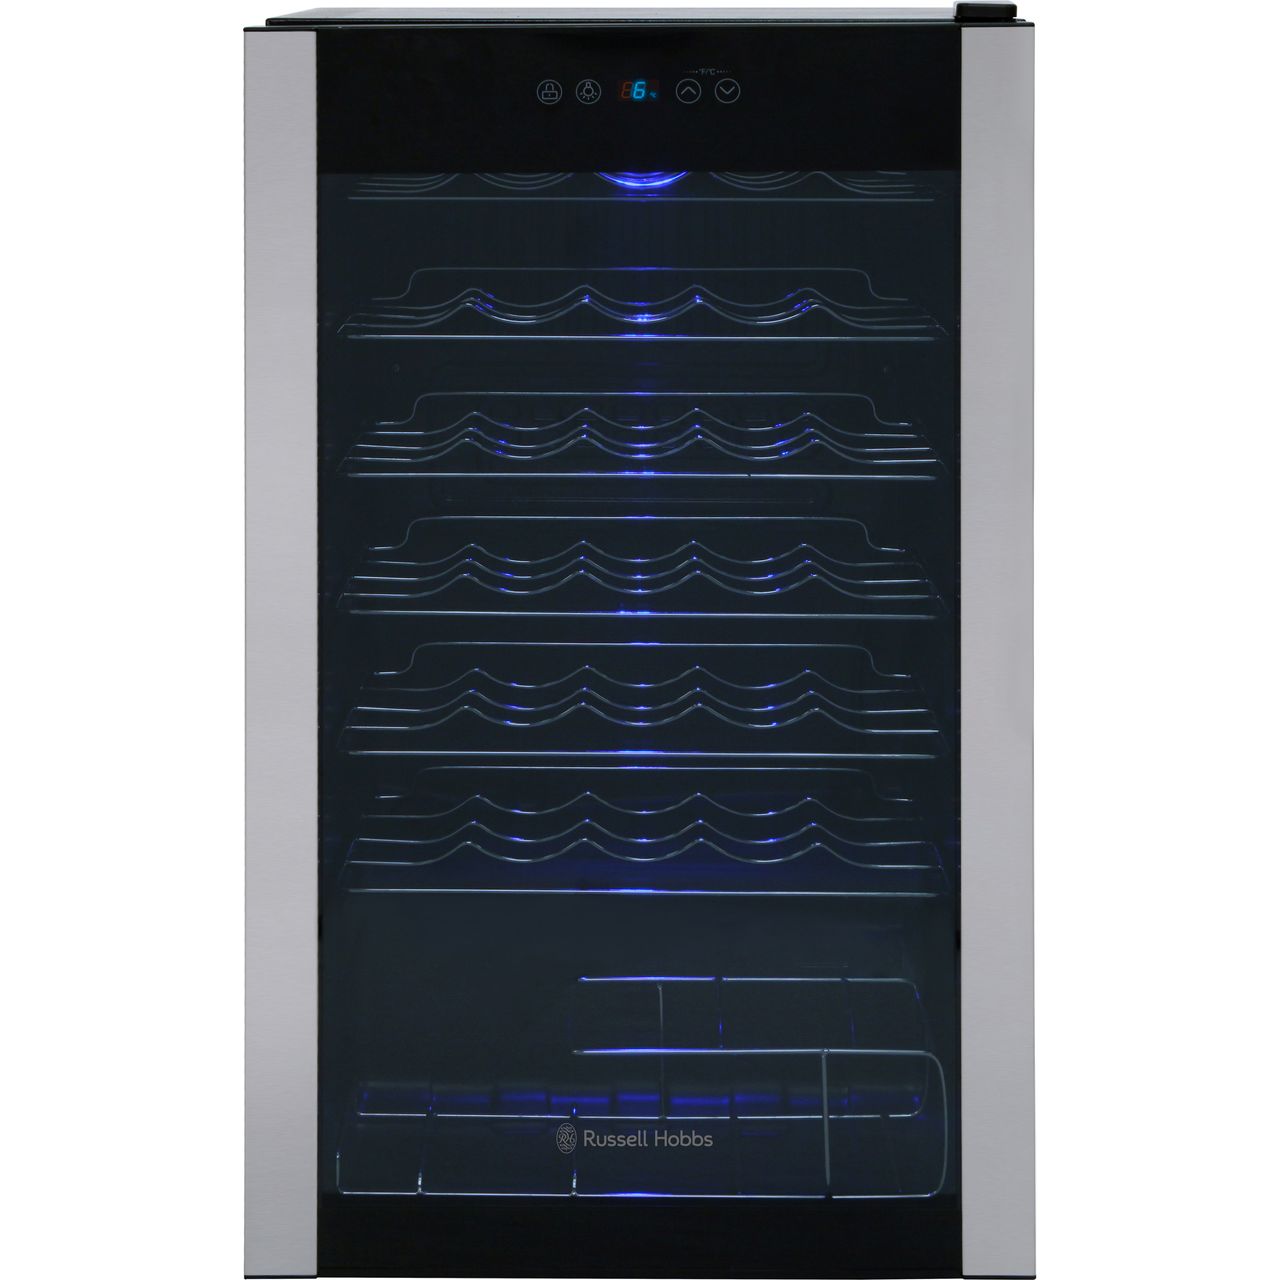 Russell Hobbs RH34WC1 Wine Cooler Review